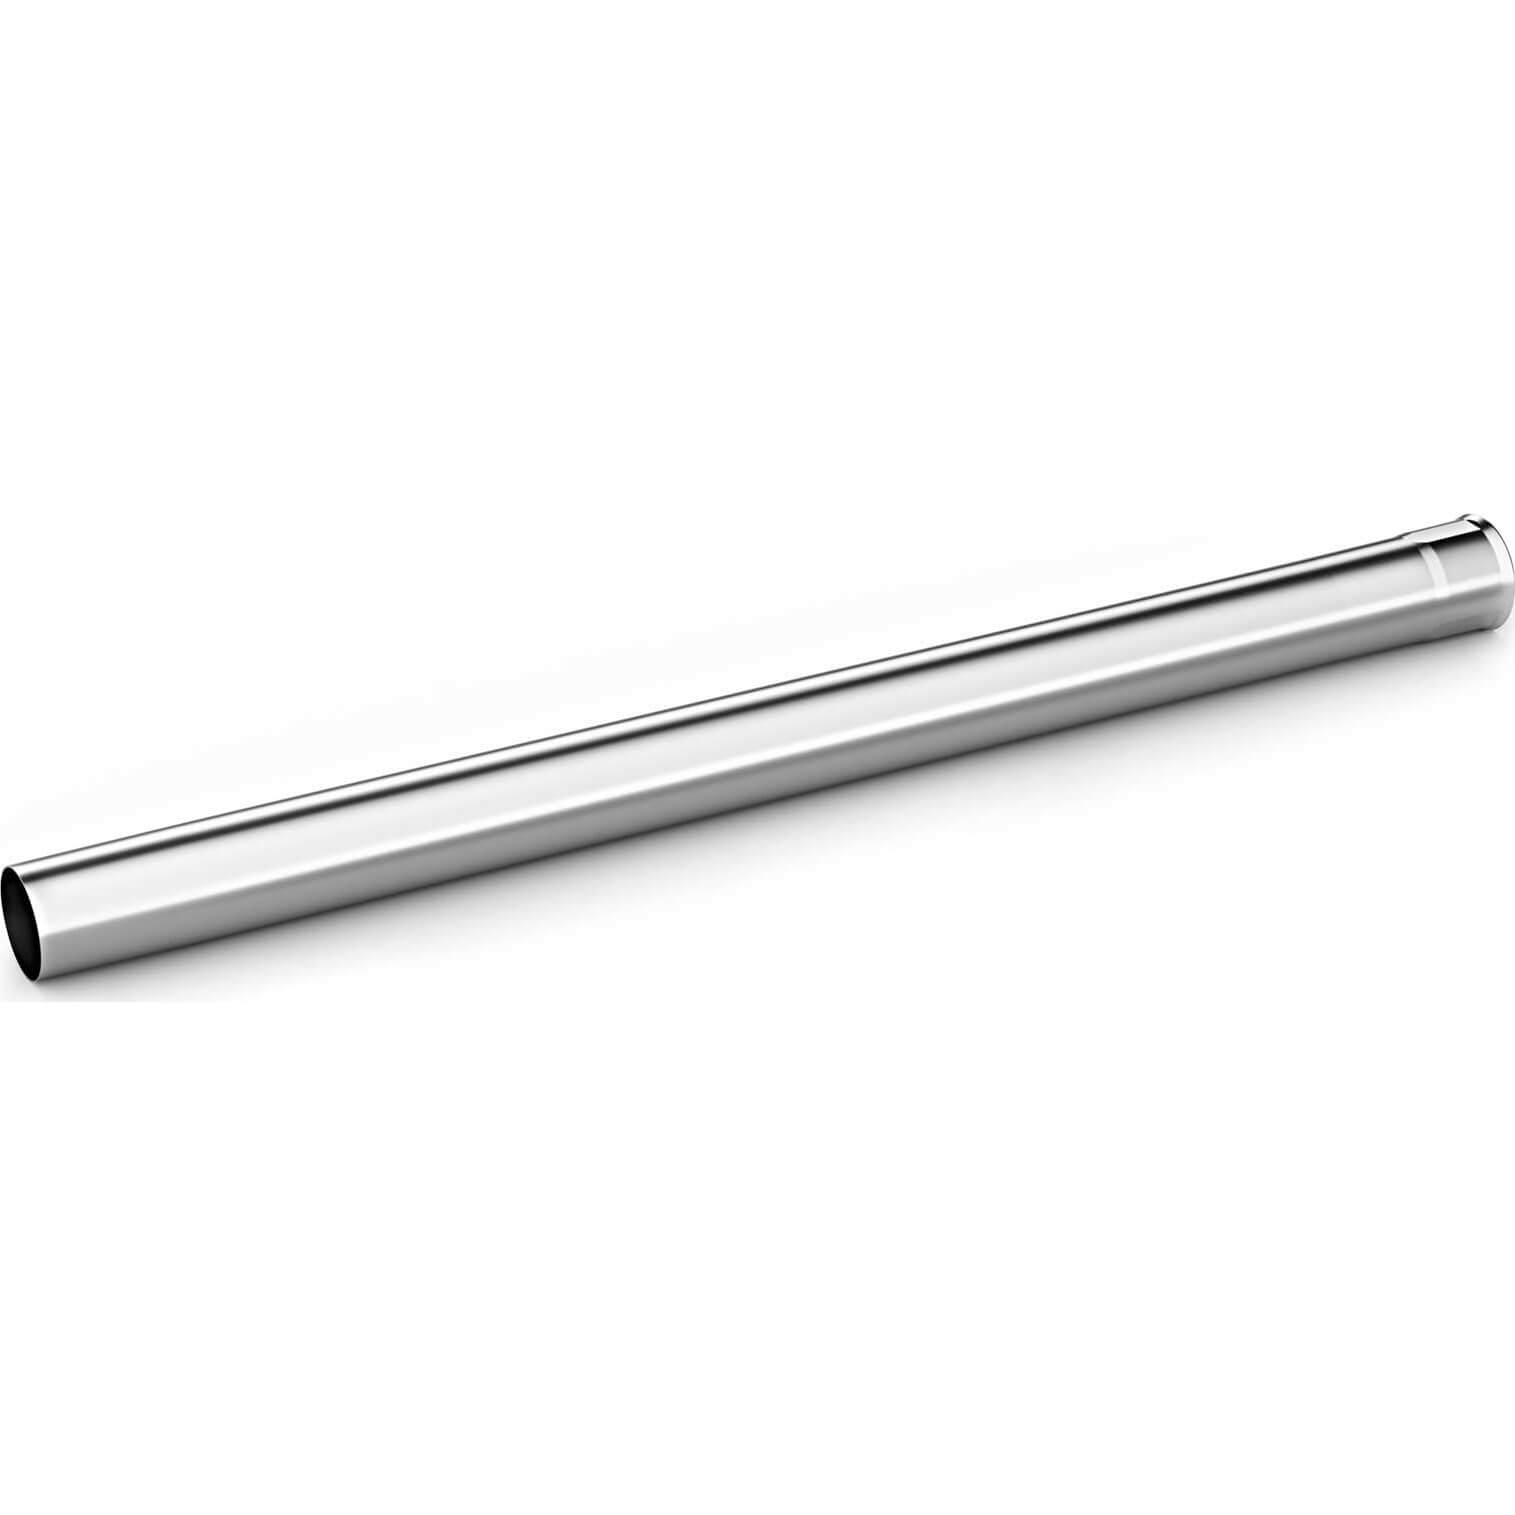 Image of Karcher Chrome Suction Tube 505mm for T 10/1, 12/1 and NT 22/1 Vacuum Cleaners 0.5m